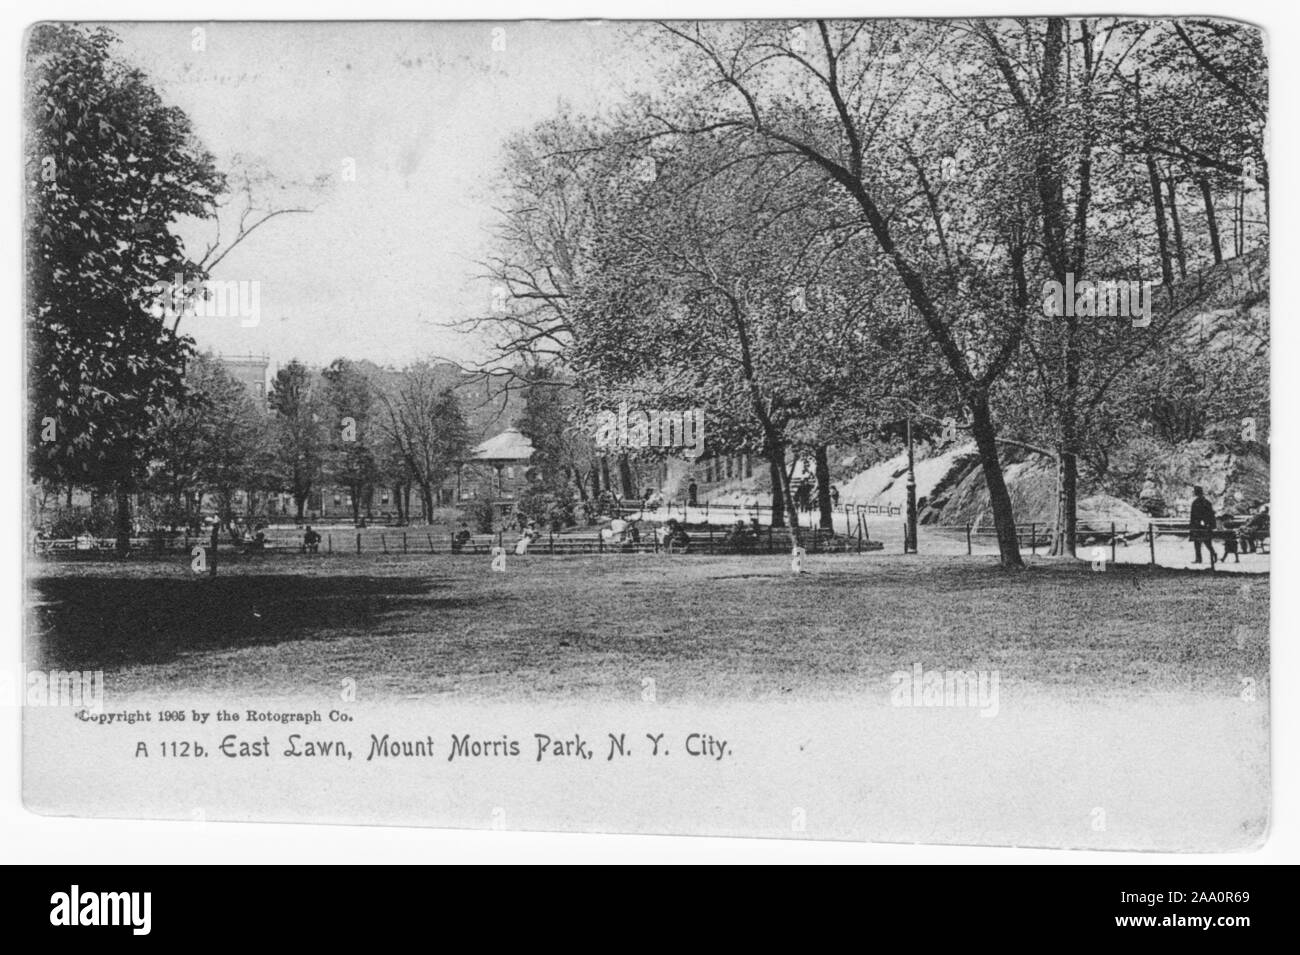 Engraved postcard of the east lawn of Mount Morris Park, New York City, created and published by Rotograph Co, 1906. From the New York Public Library. () Stock Photo